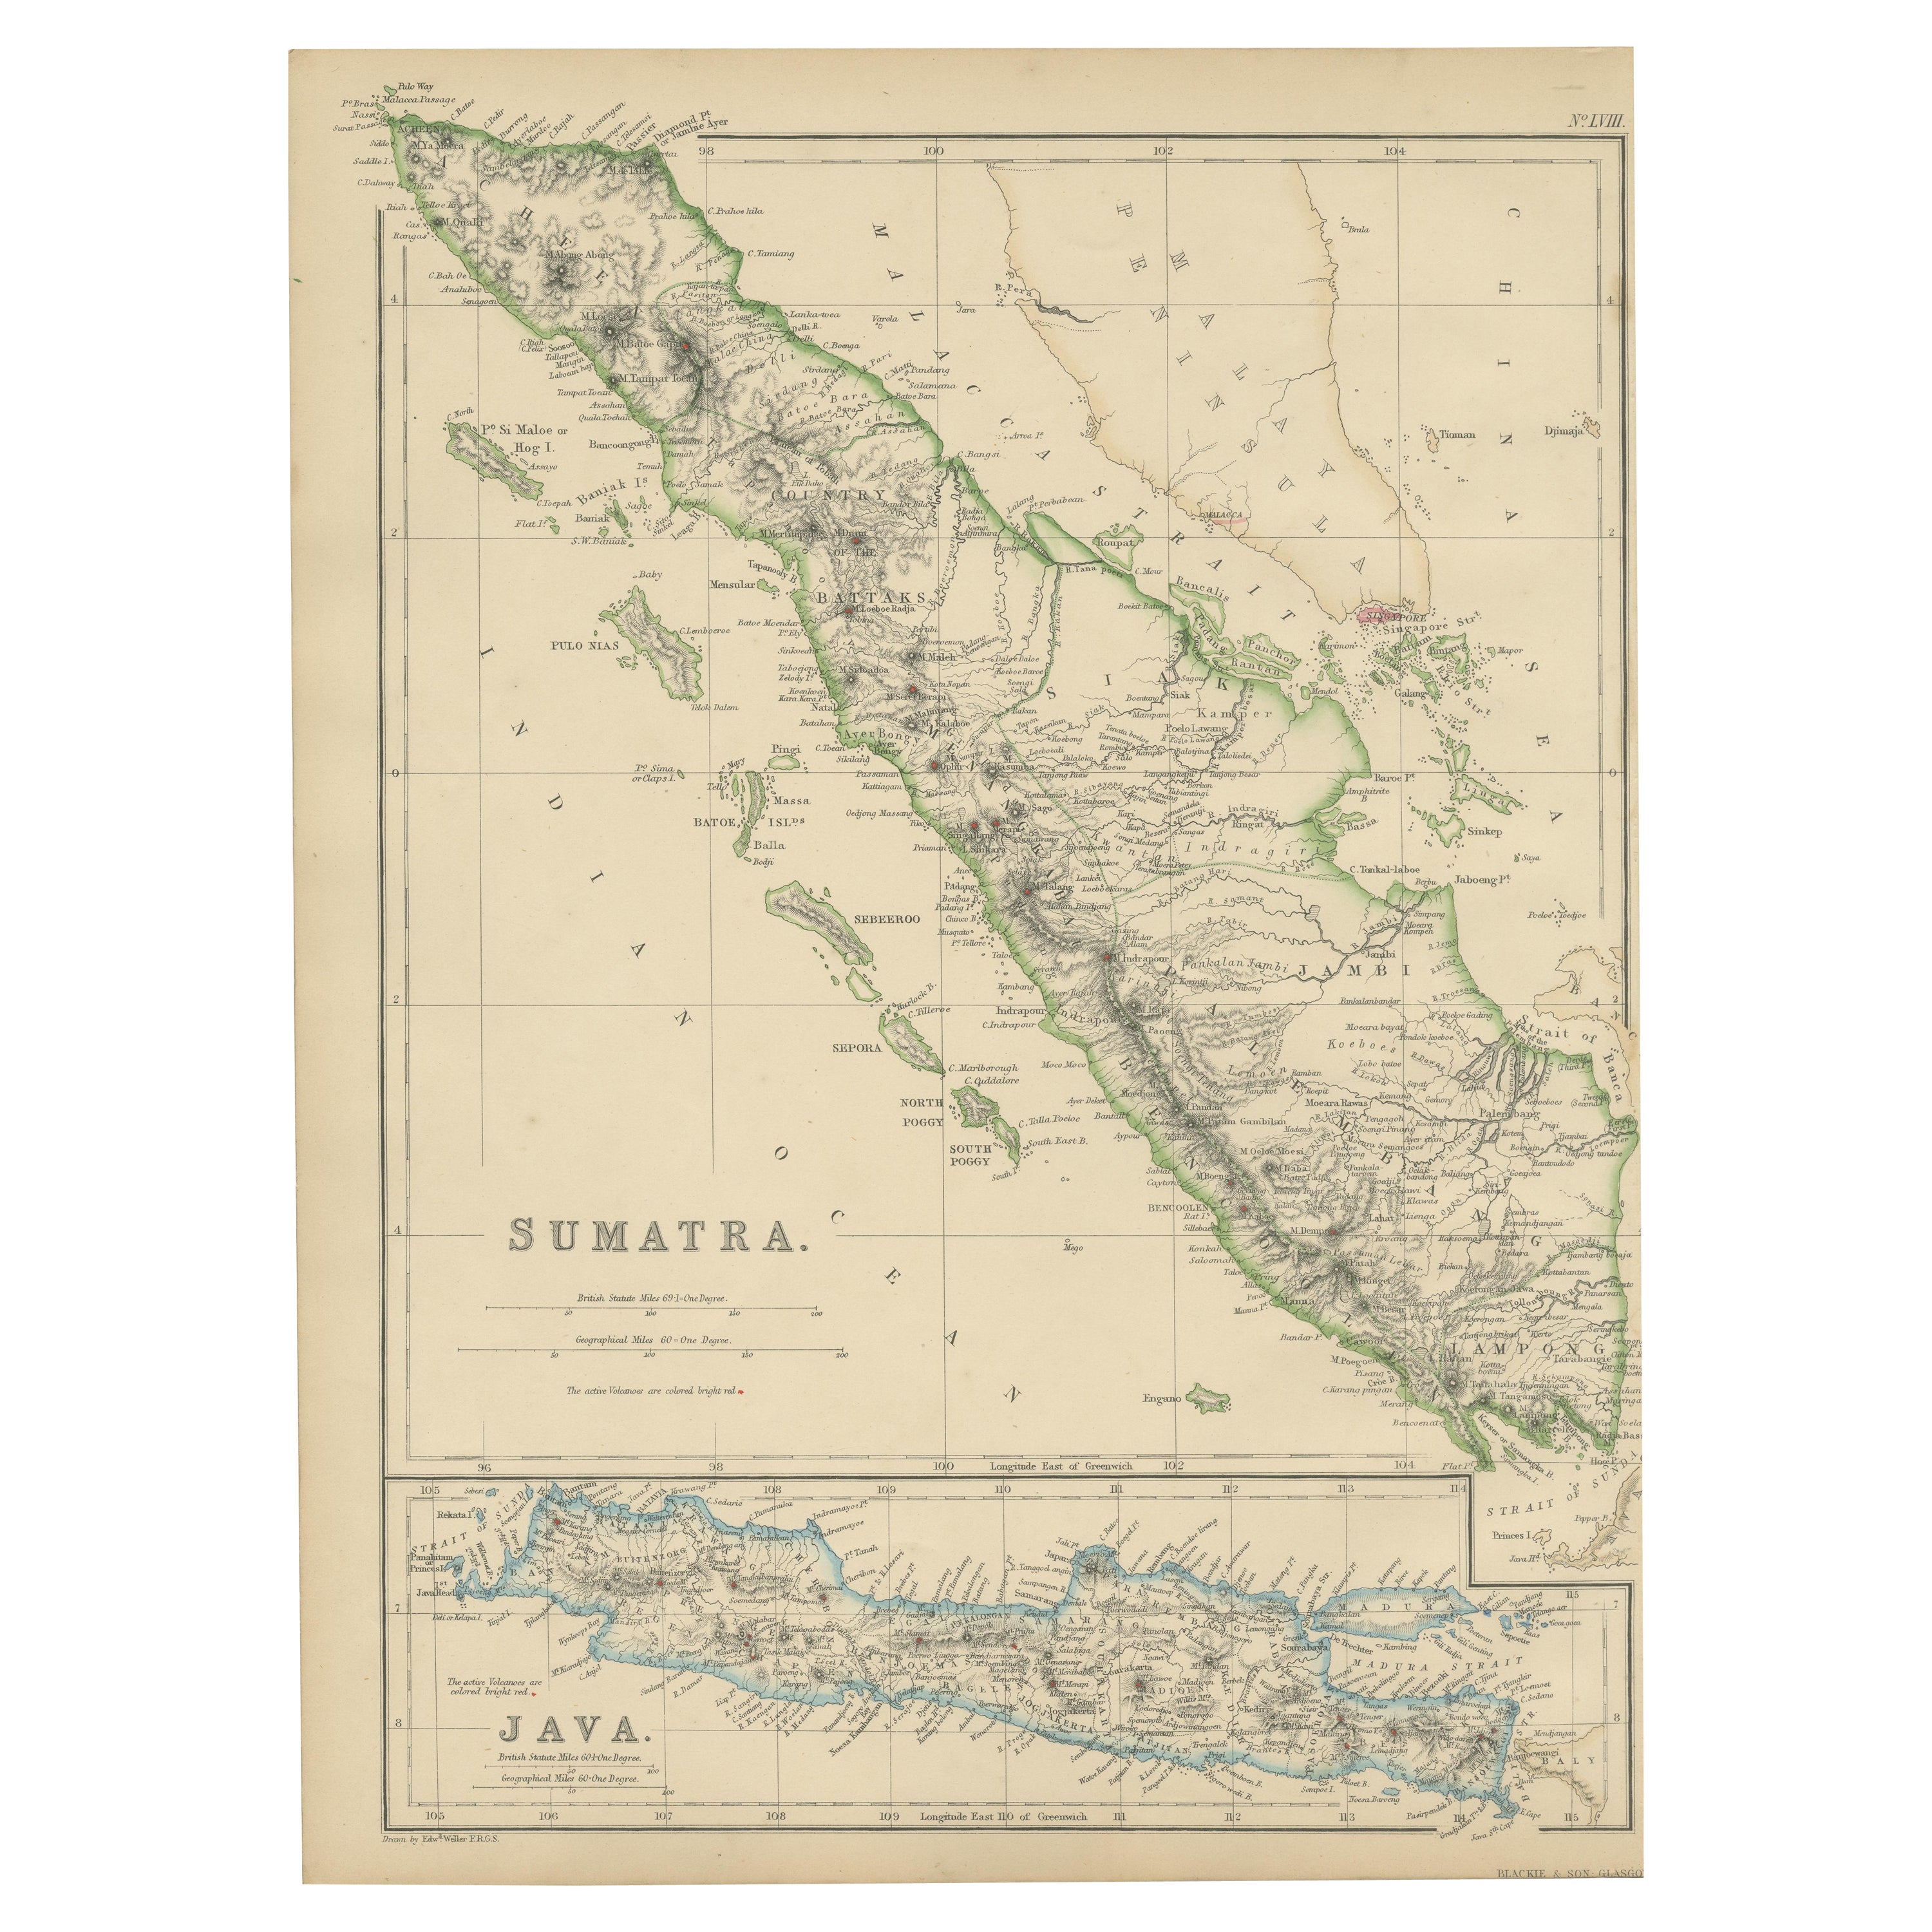 Antique Map of Sumatra by W. G. Blackie, 1859